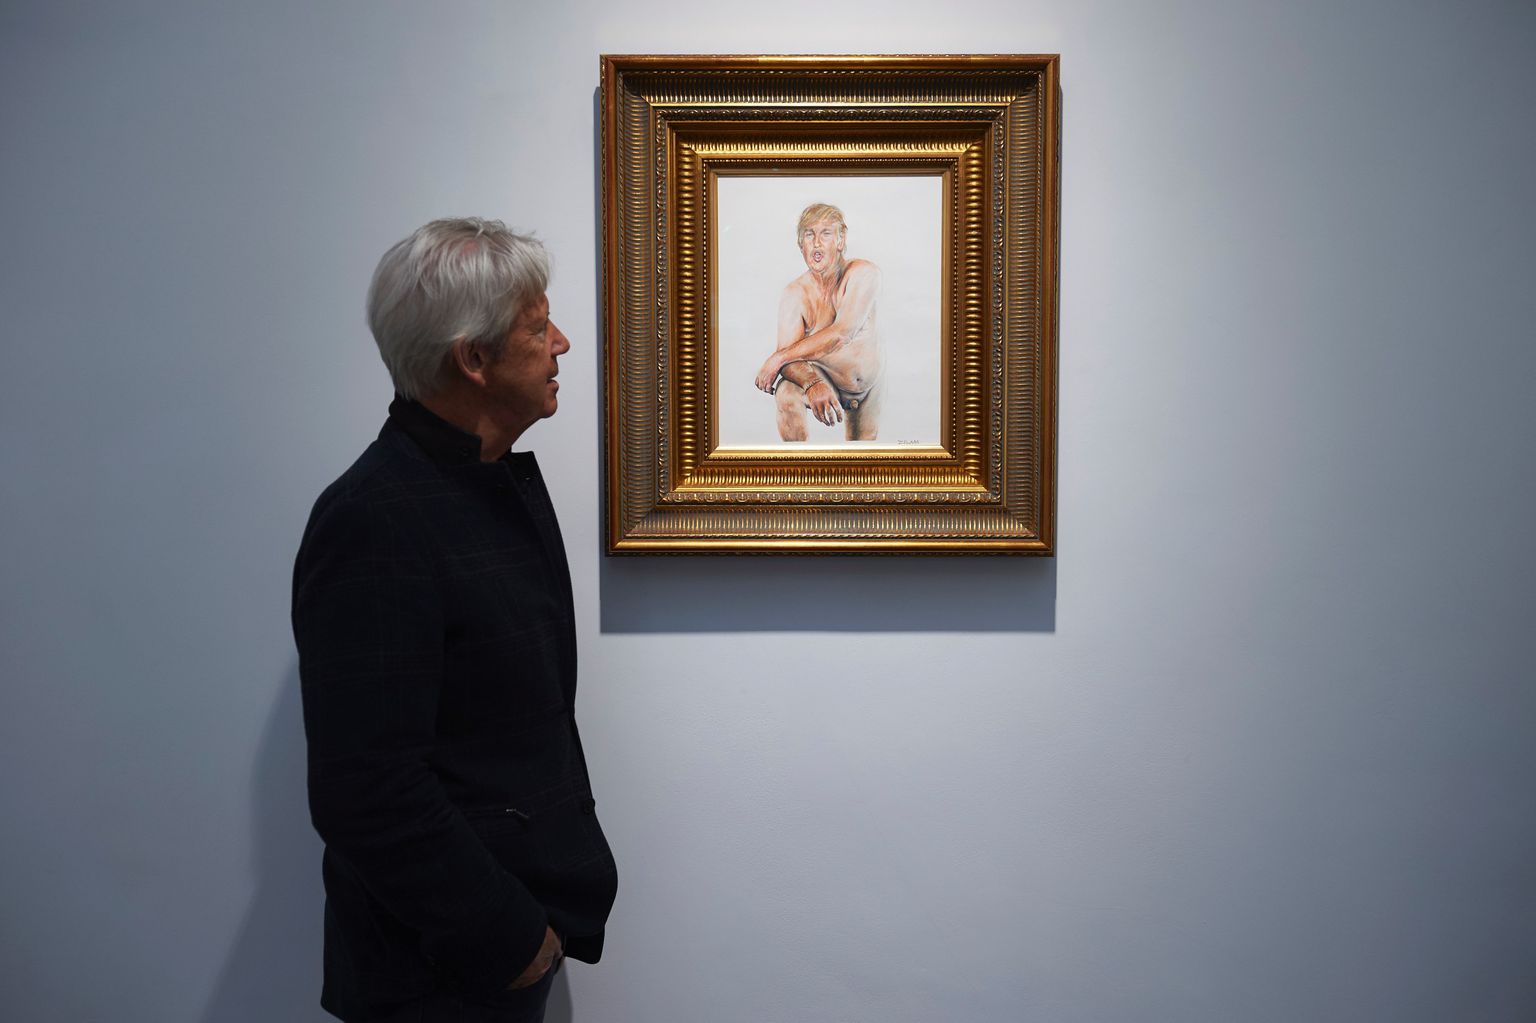 TOPSHOT - A gallery curator looks at a painting of US presidential candidate Donald Trump titled "Make America Great Again" by Los Angeles based artist Illma Gore at the Maddox gallery in central London on April 9, 2016. / AFP PHOTO / NIKLAS HALLE'N / RESTRICTED TO EDITORIAL USE - MANDATORY MENTION OF THE ARTIST UPON PUBLICATION - TO ILLUSTRATE THE EVENT AS SPECIFIED IN THE CAPTION